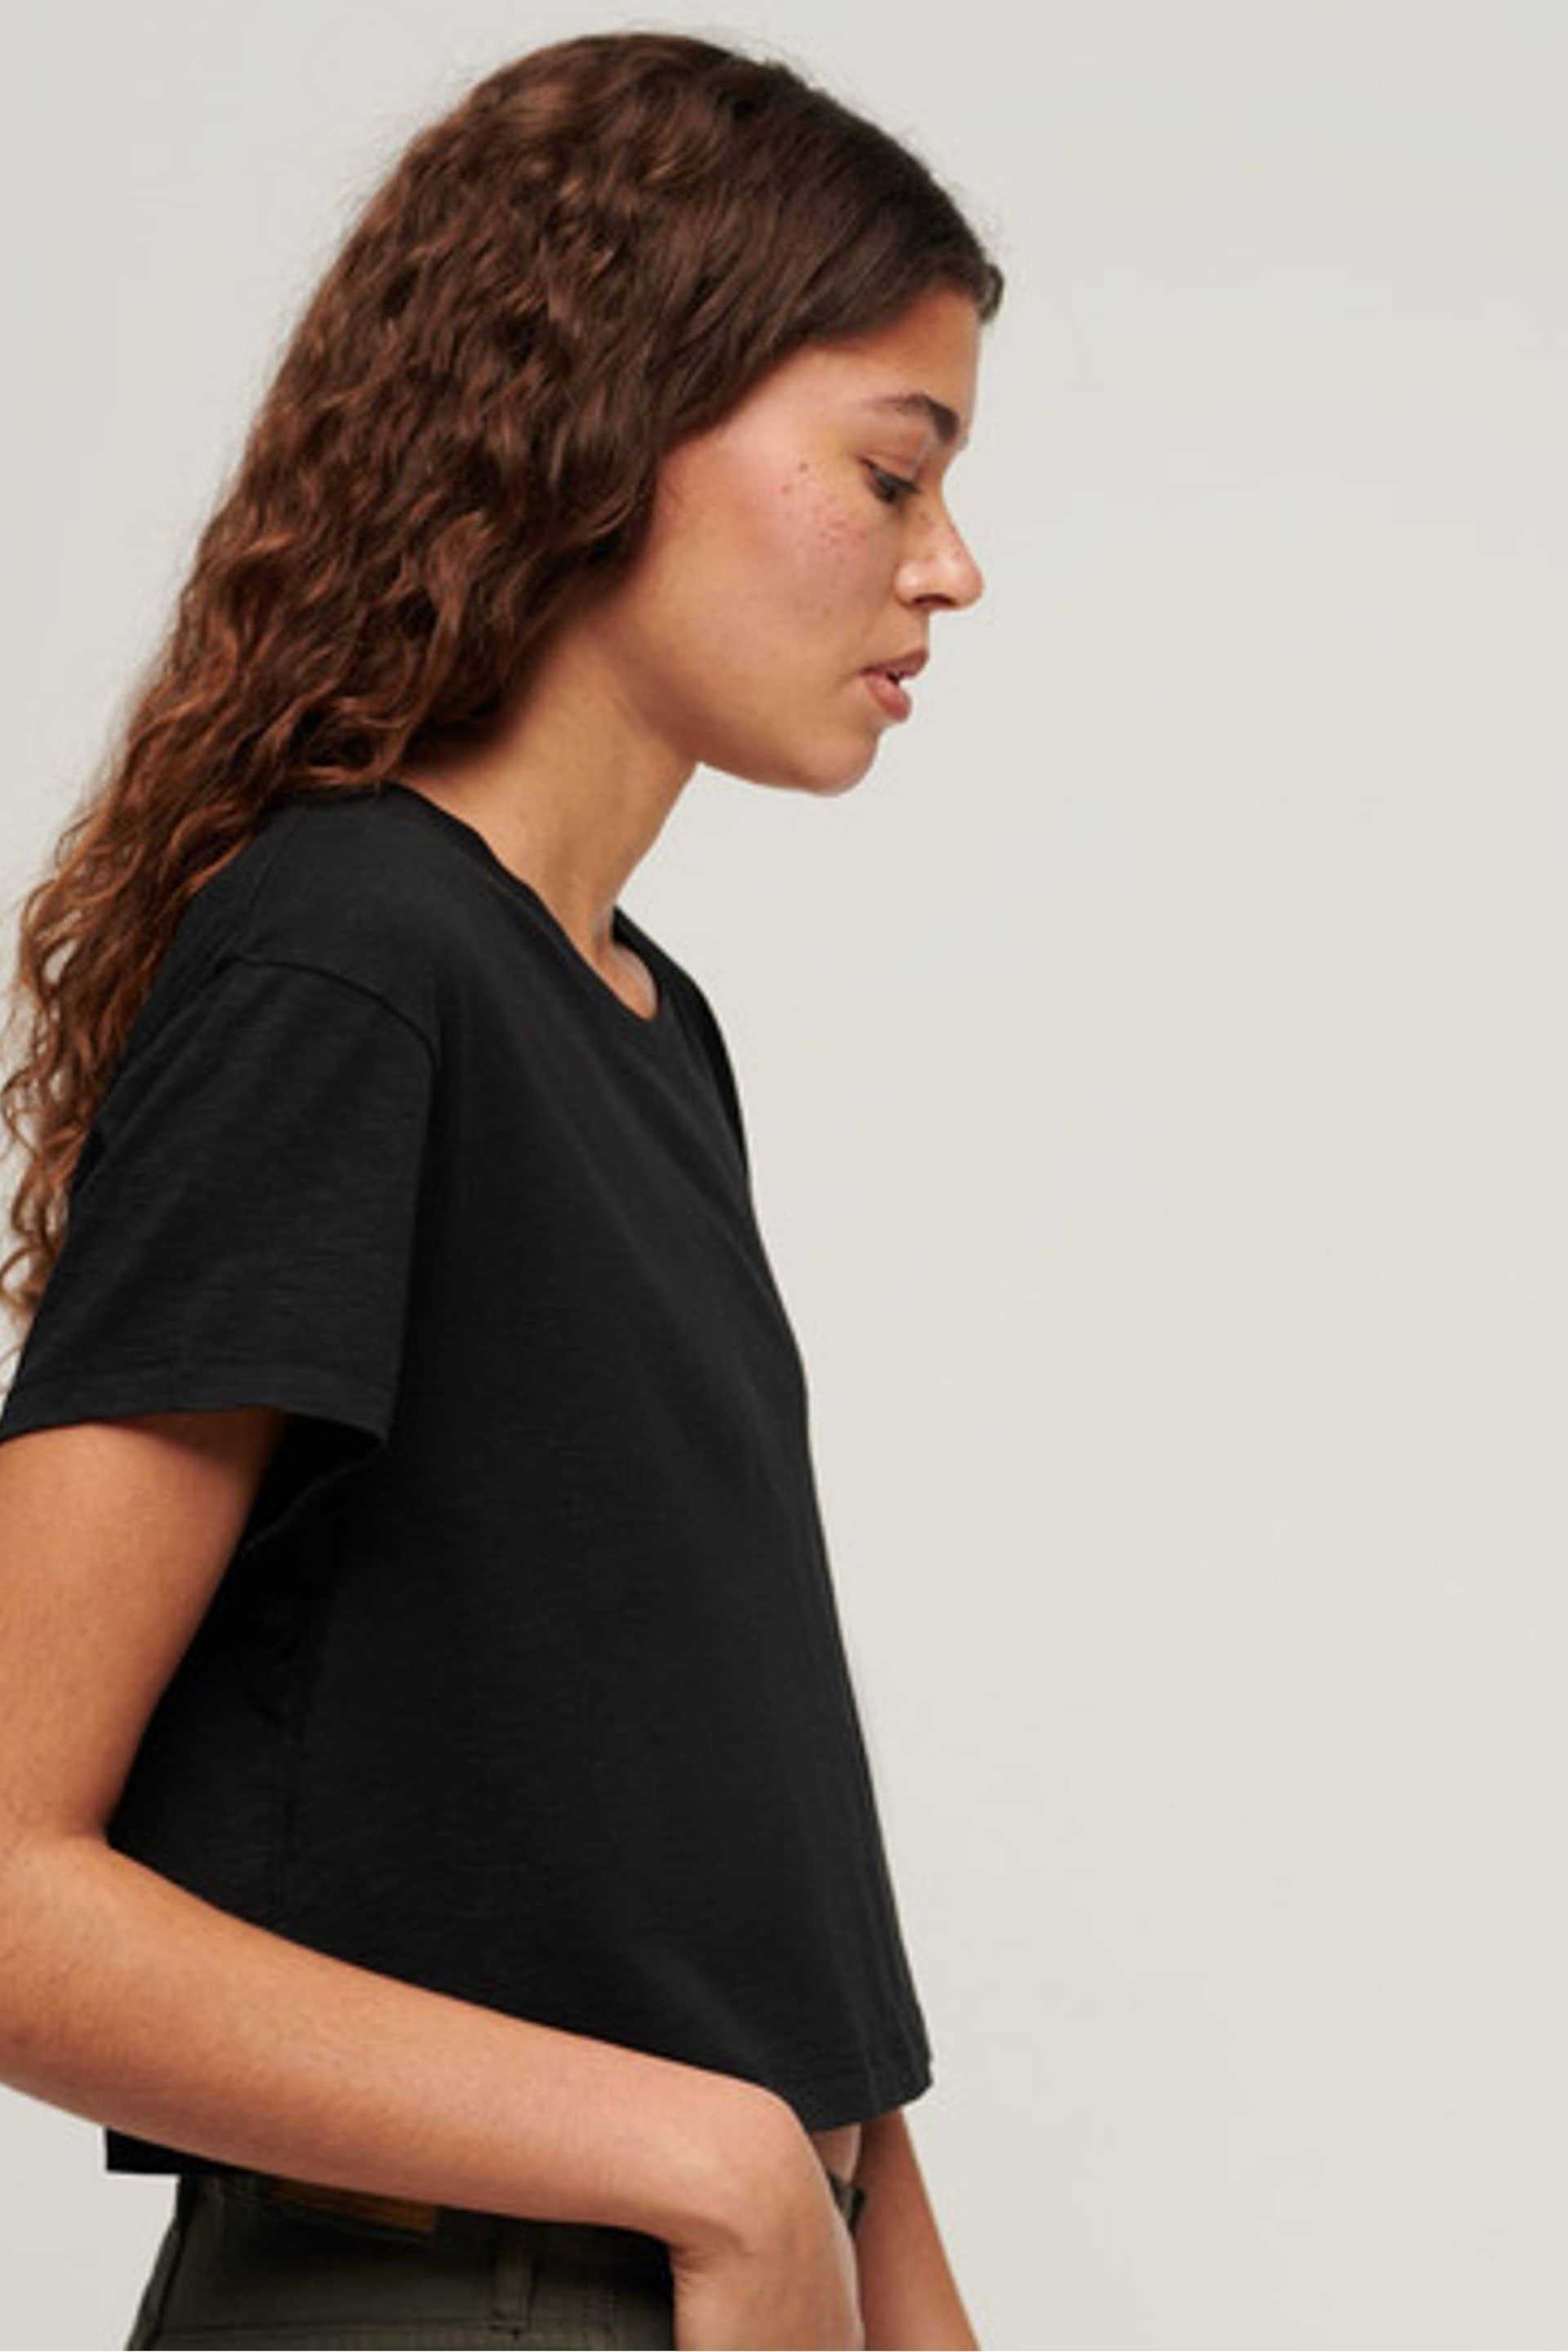 Superdry Black Slouchy Cropped T-Shirt - Image 4 of 6